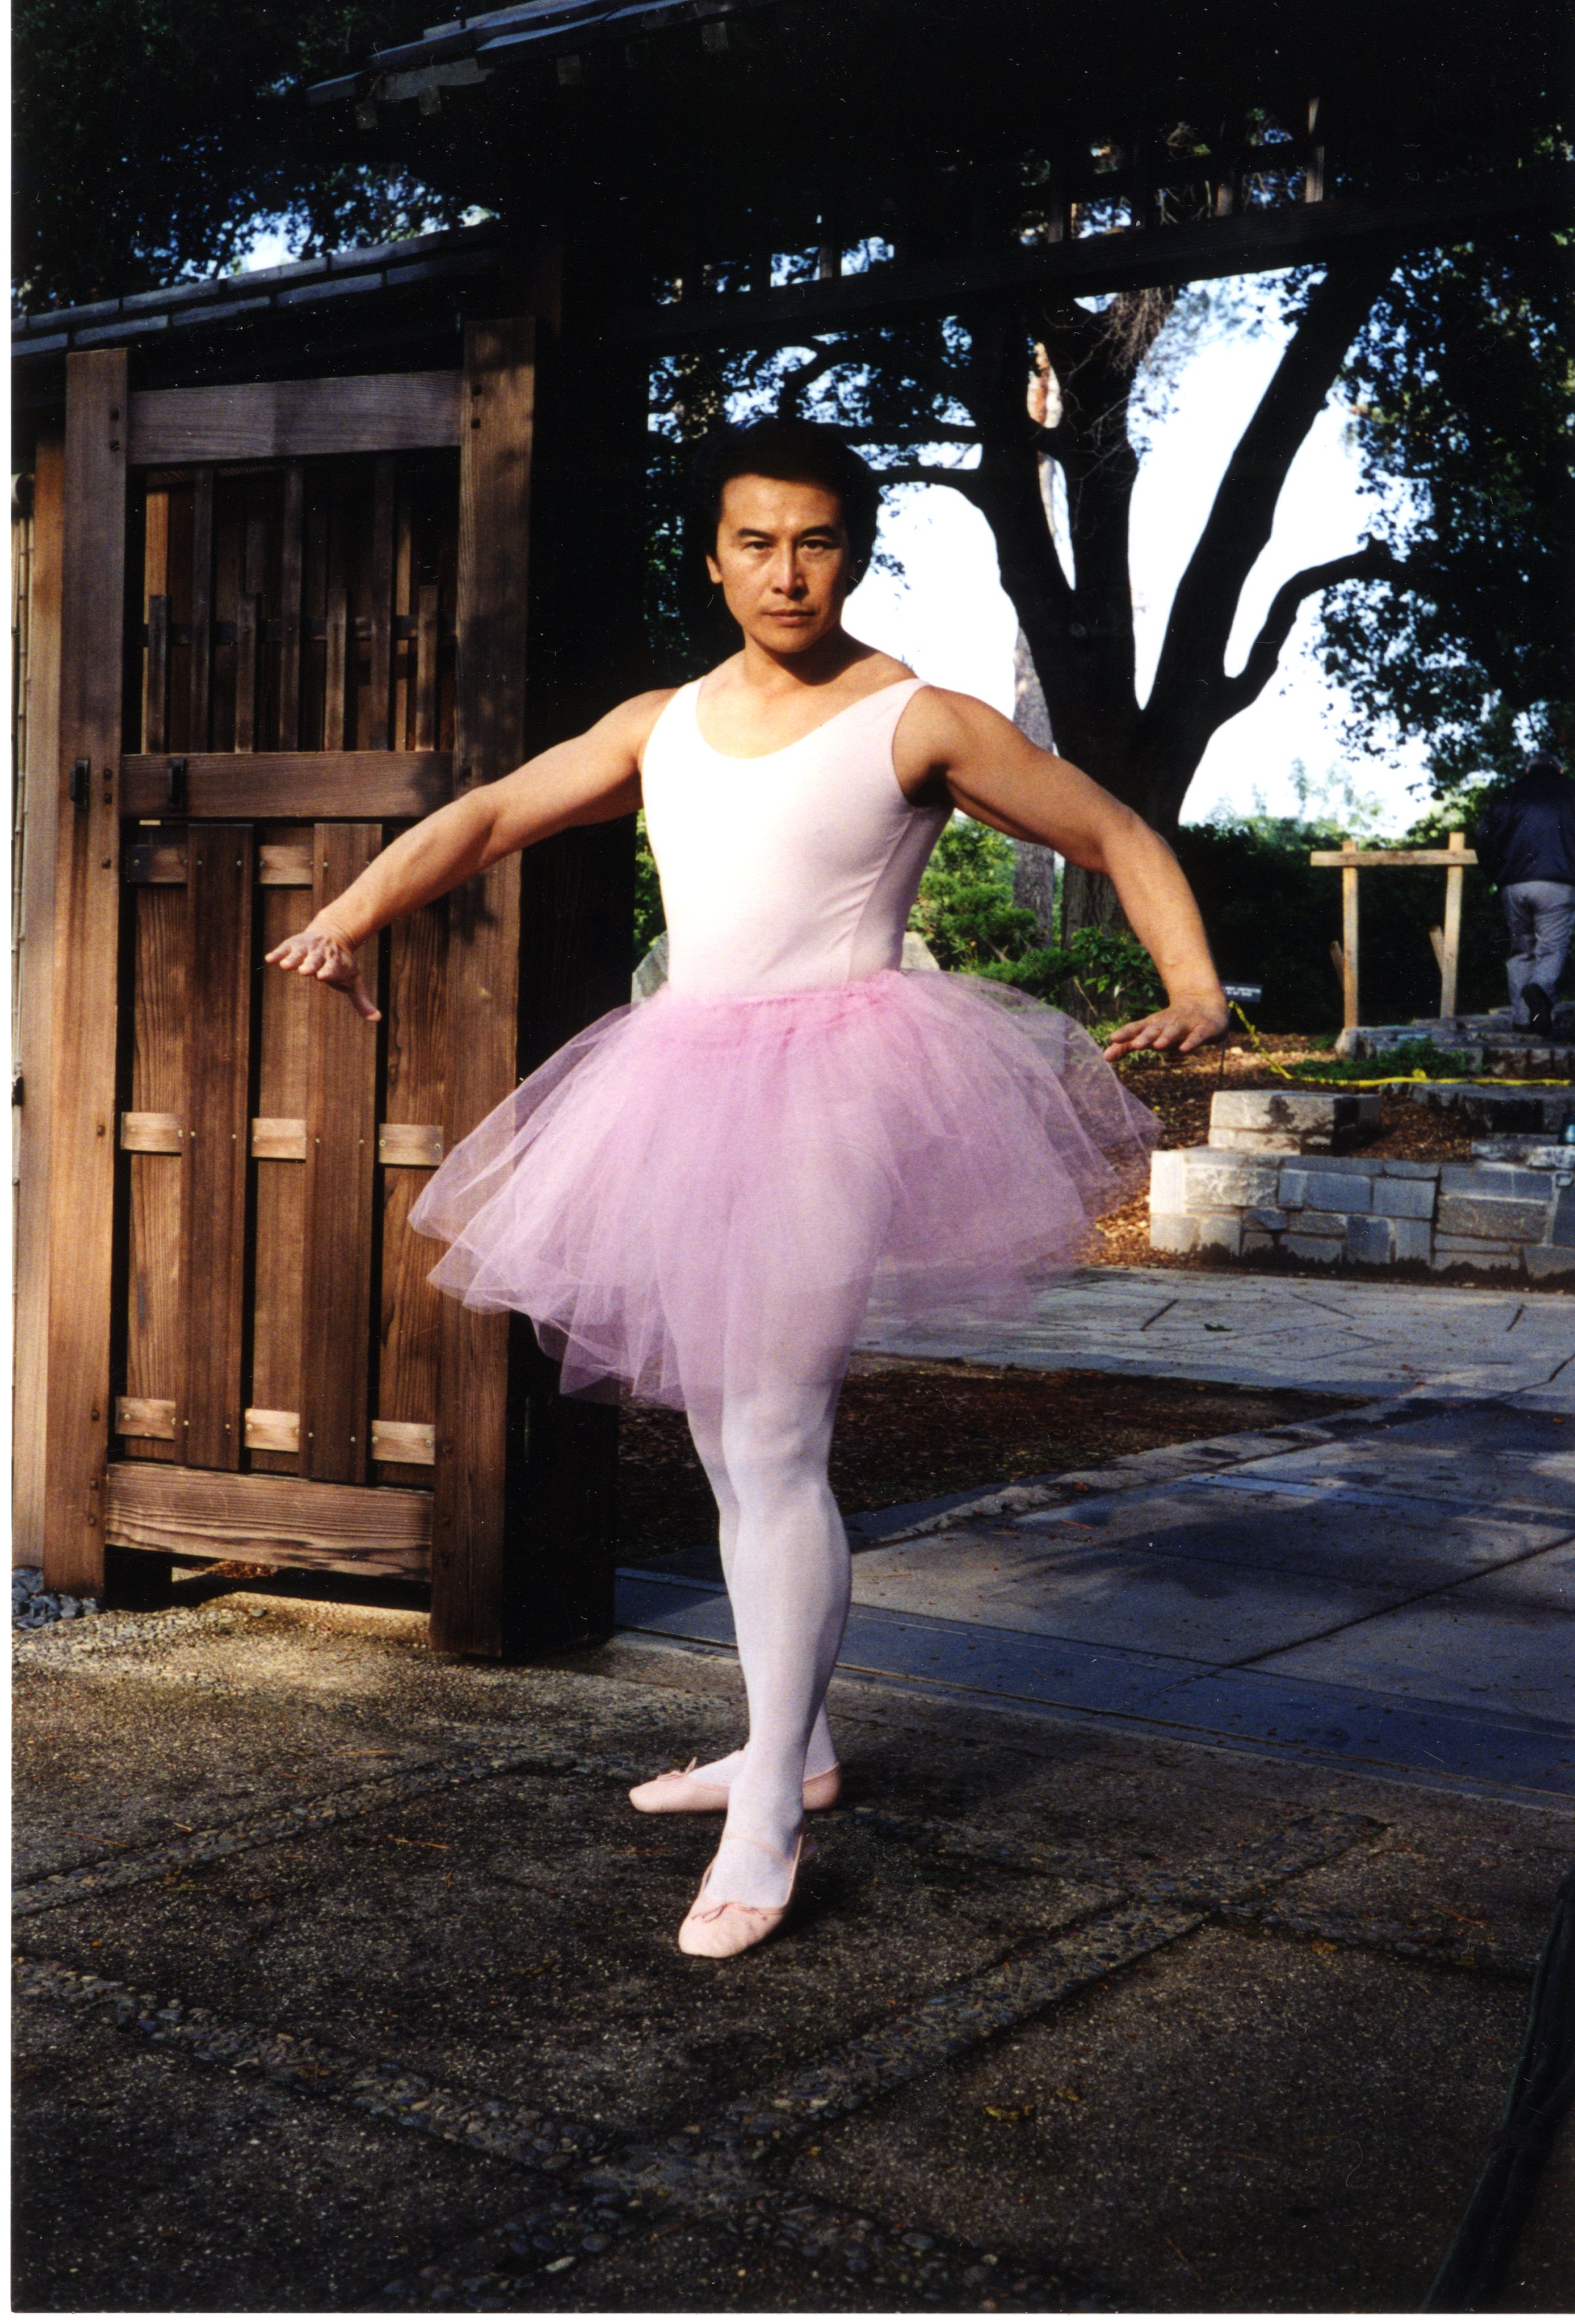 With a Tutu for a Hewlett Packard commercial